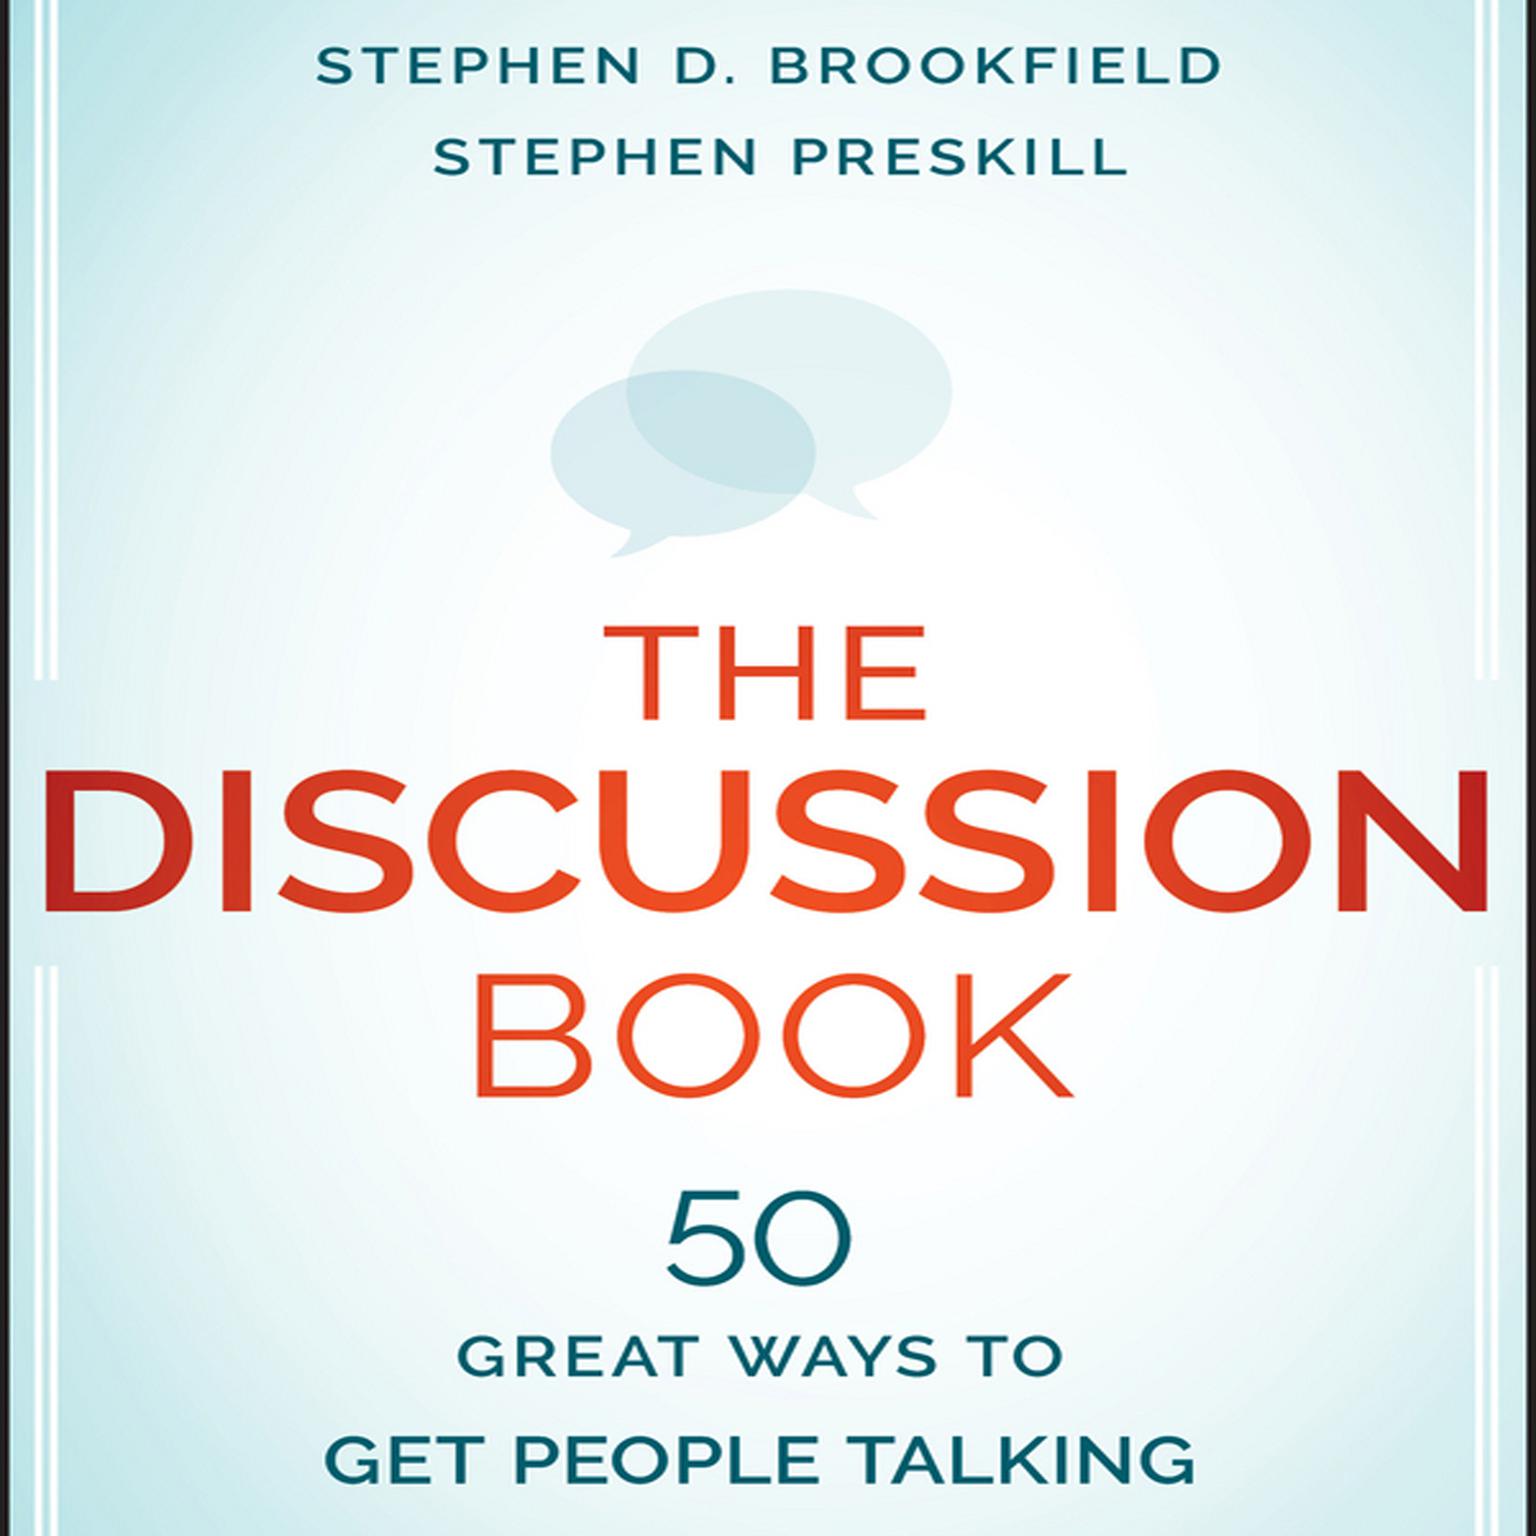 The Discussion Book: The Discussion Book Audiobook, by Stephen D. Brookfield